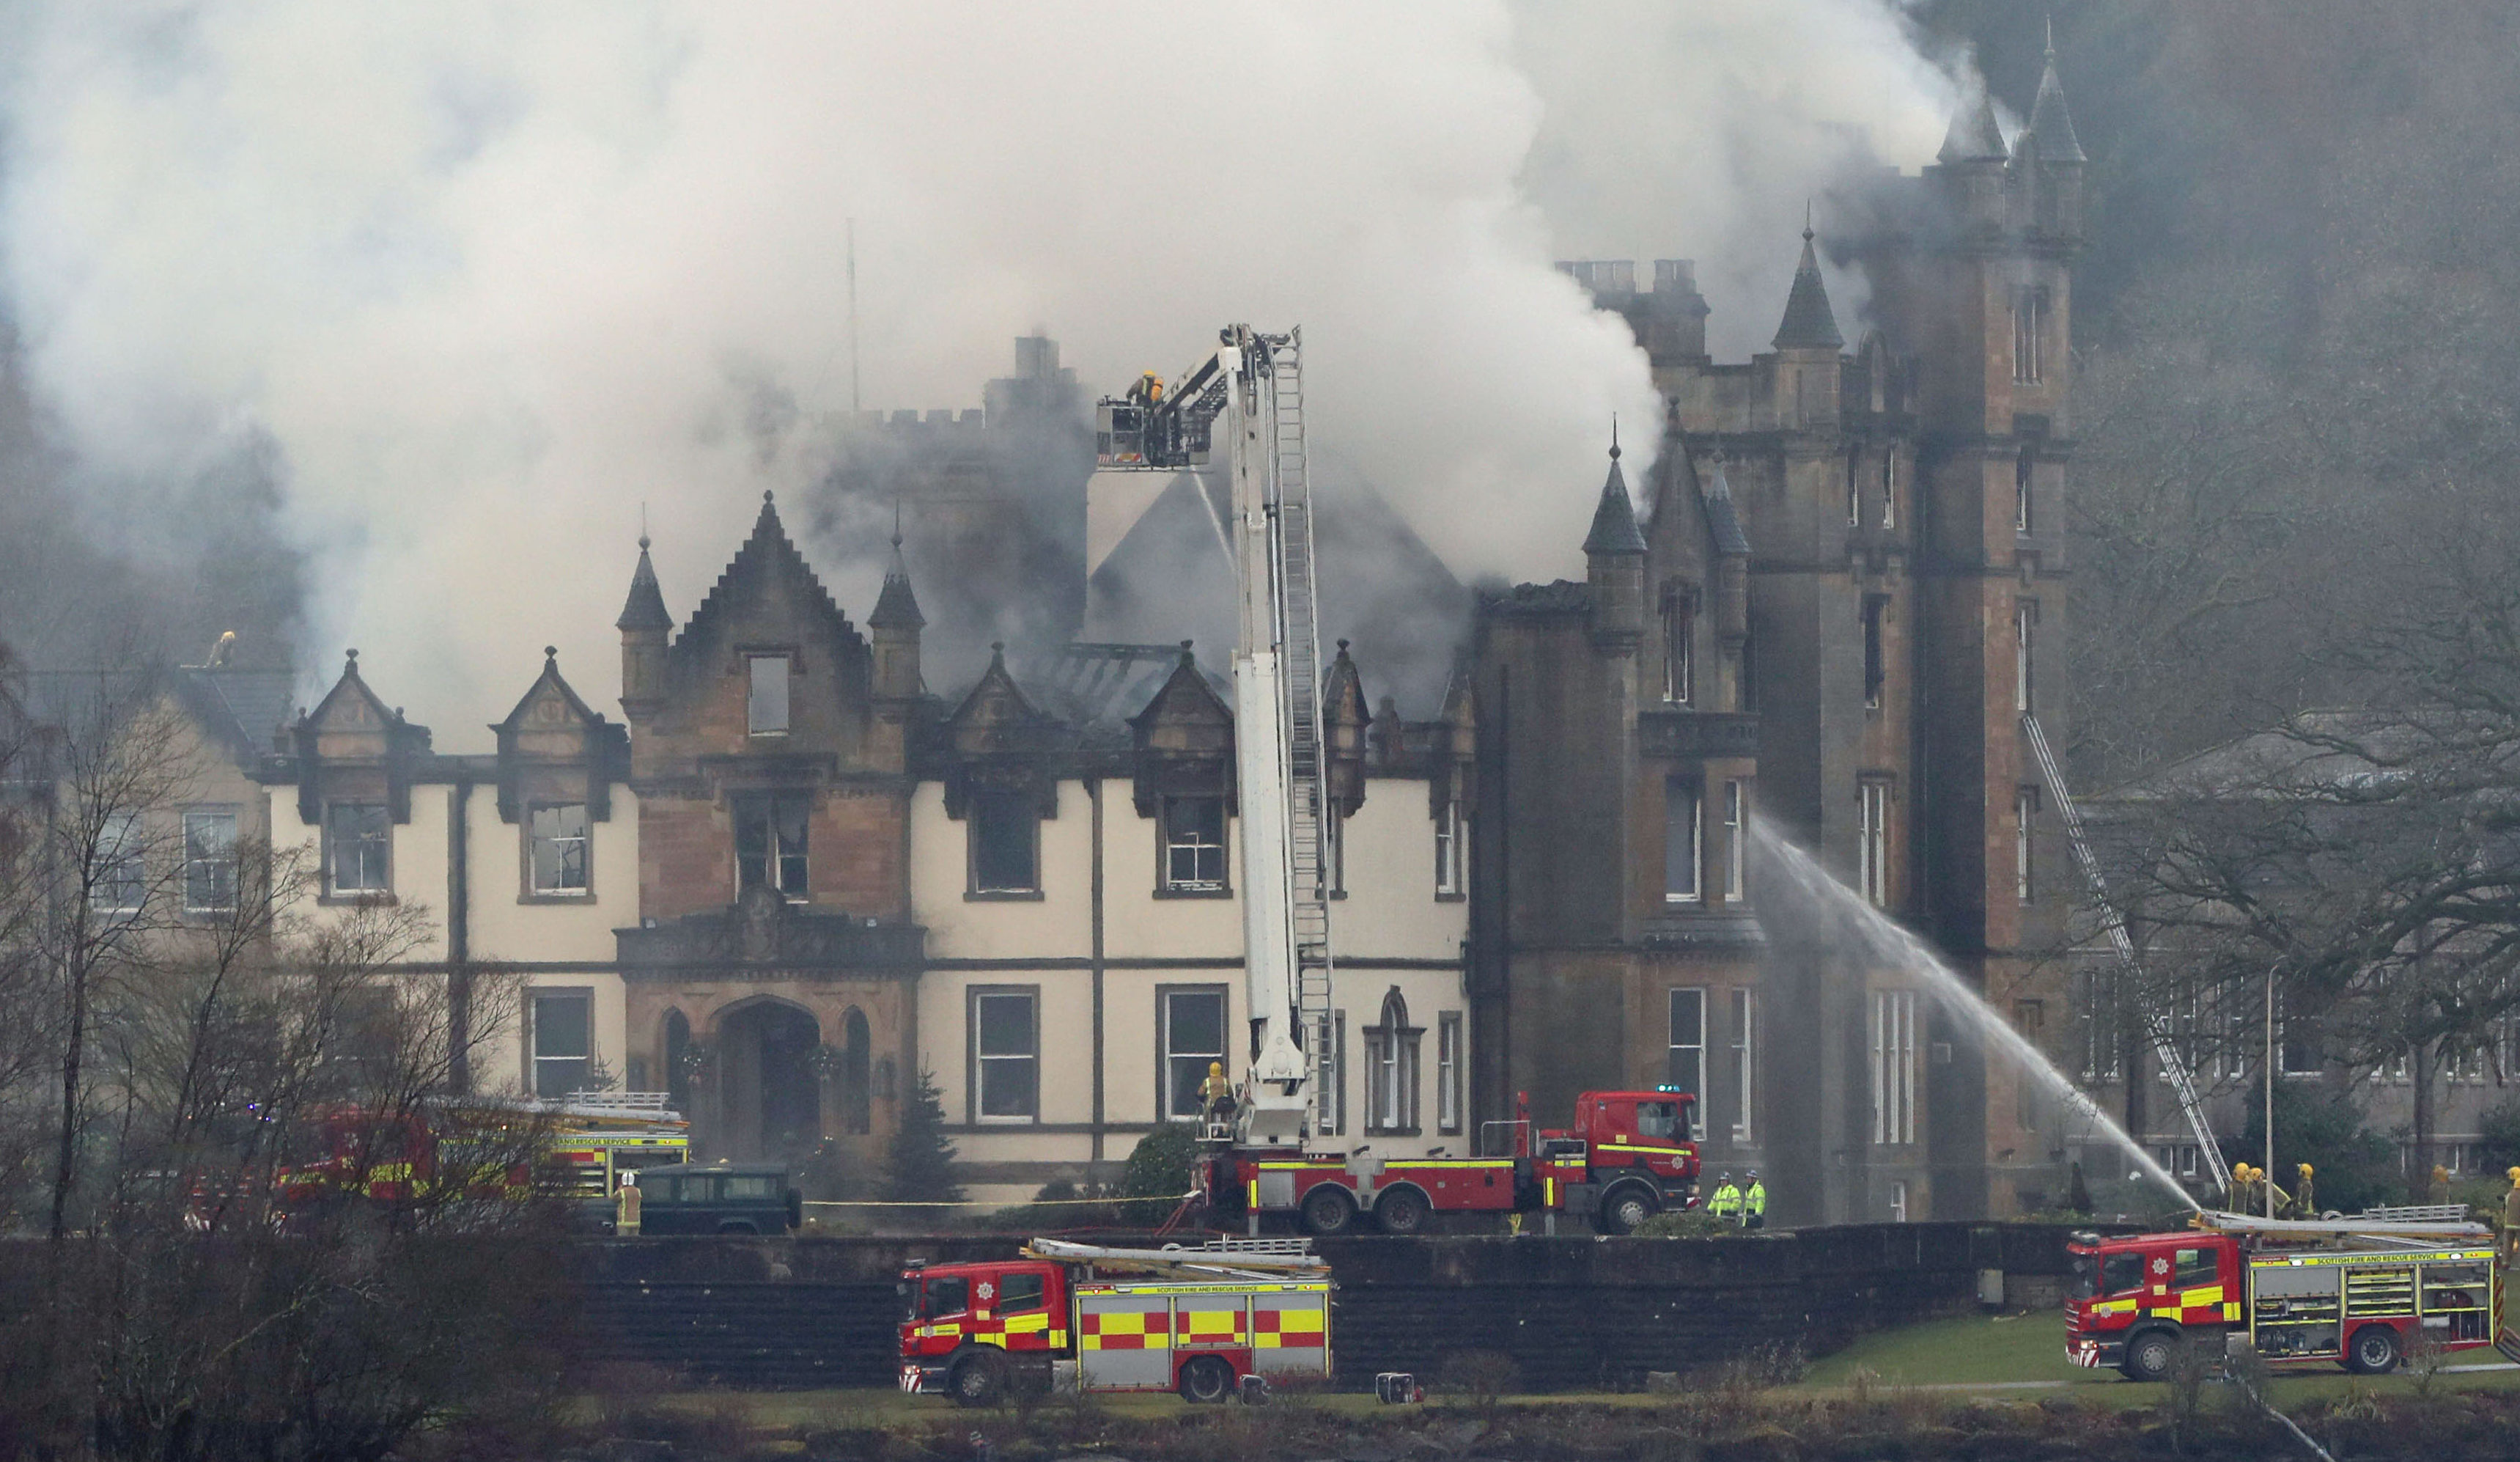 Firefighters at the scene following a fire at the Cameron House Hotel on the banks of Loch Lomond (Andrew Milligan/PA Wire)